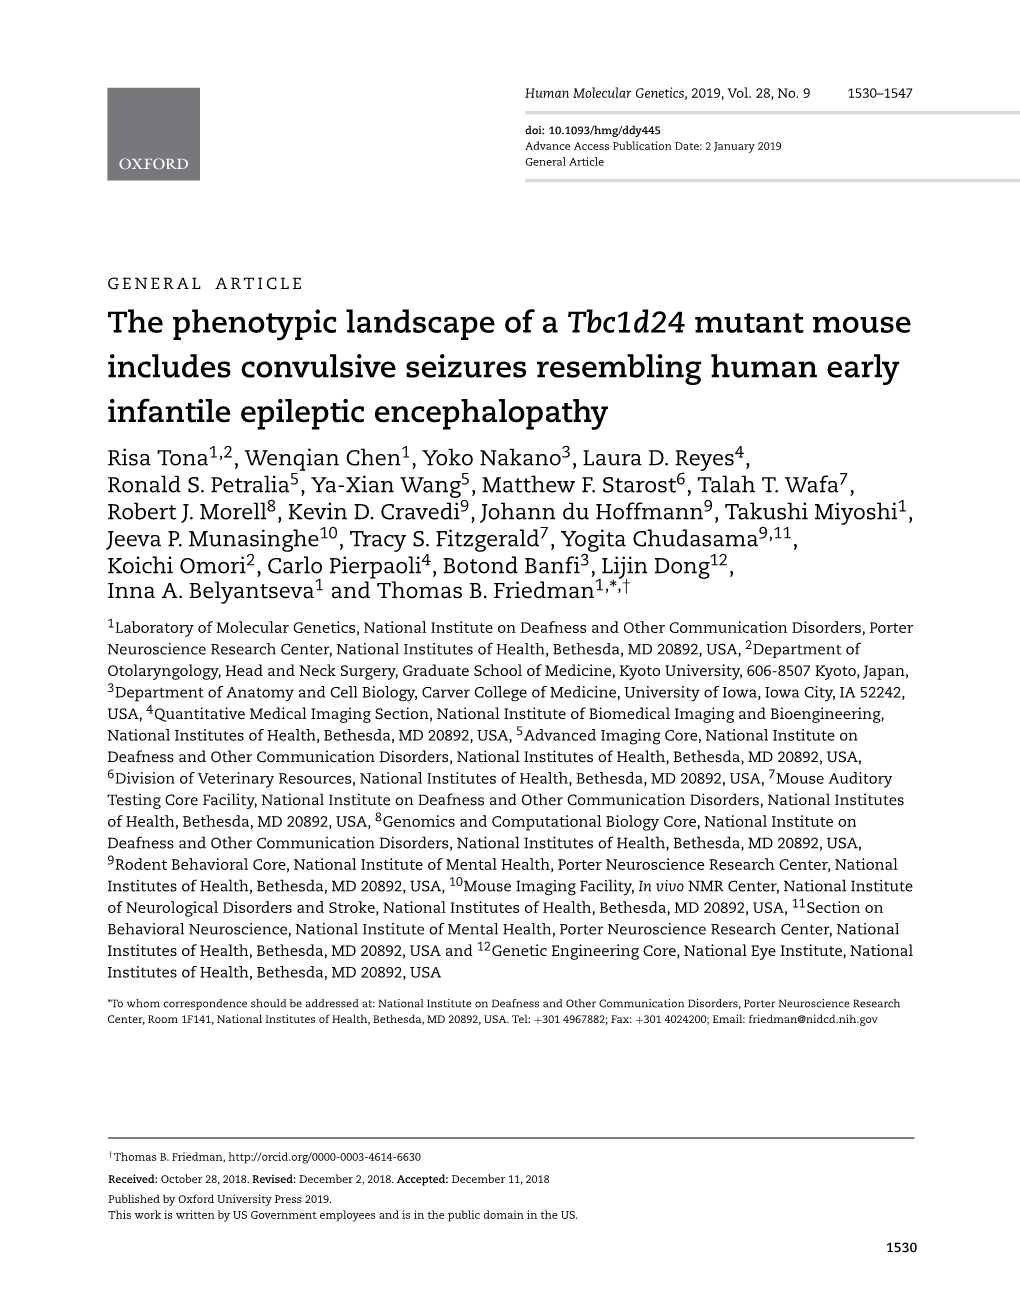 The Phenotypic Landscape of a Tbc1d24 Mutant Mouse Includes